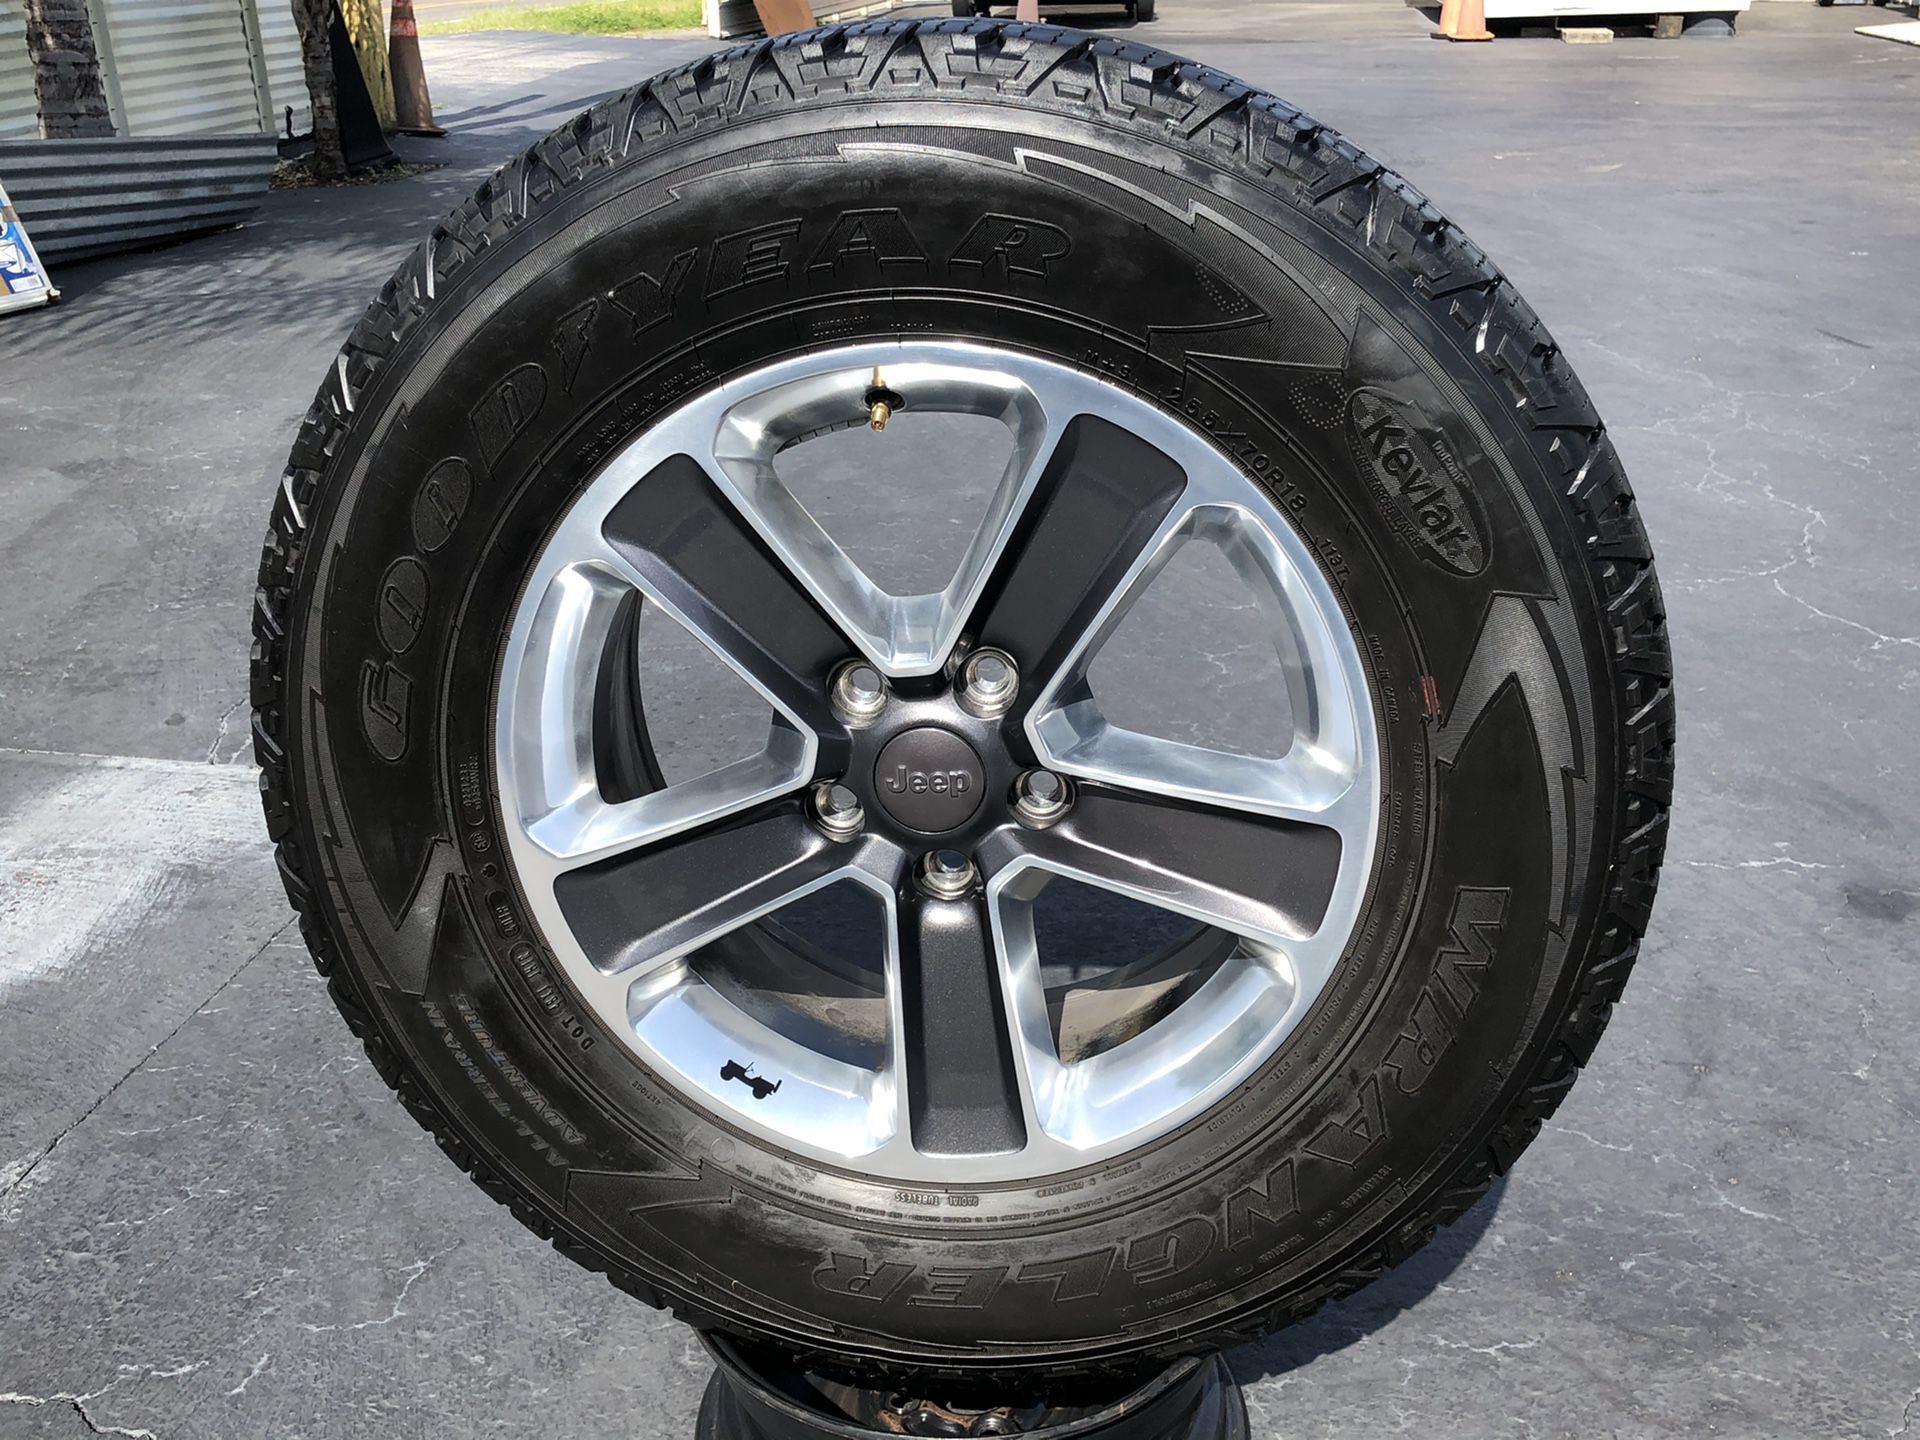 2020 Jeep rims with tires